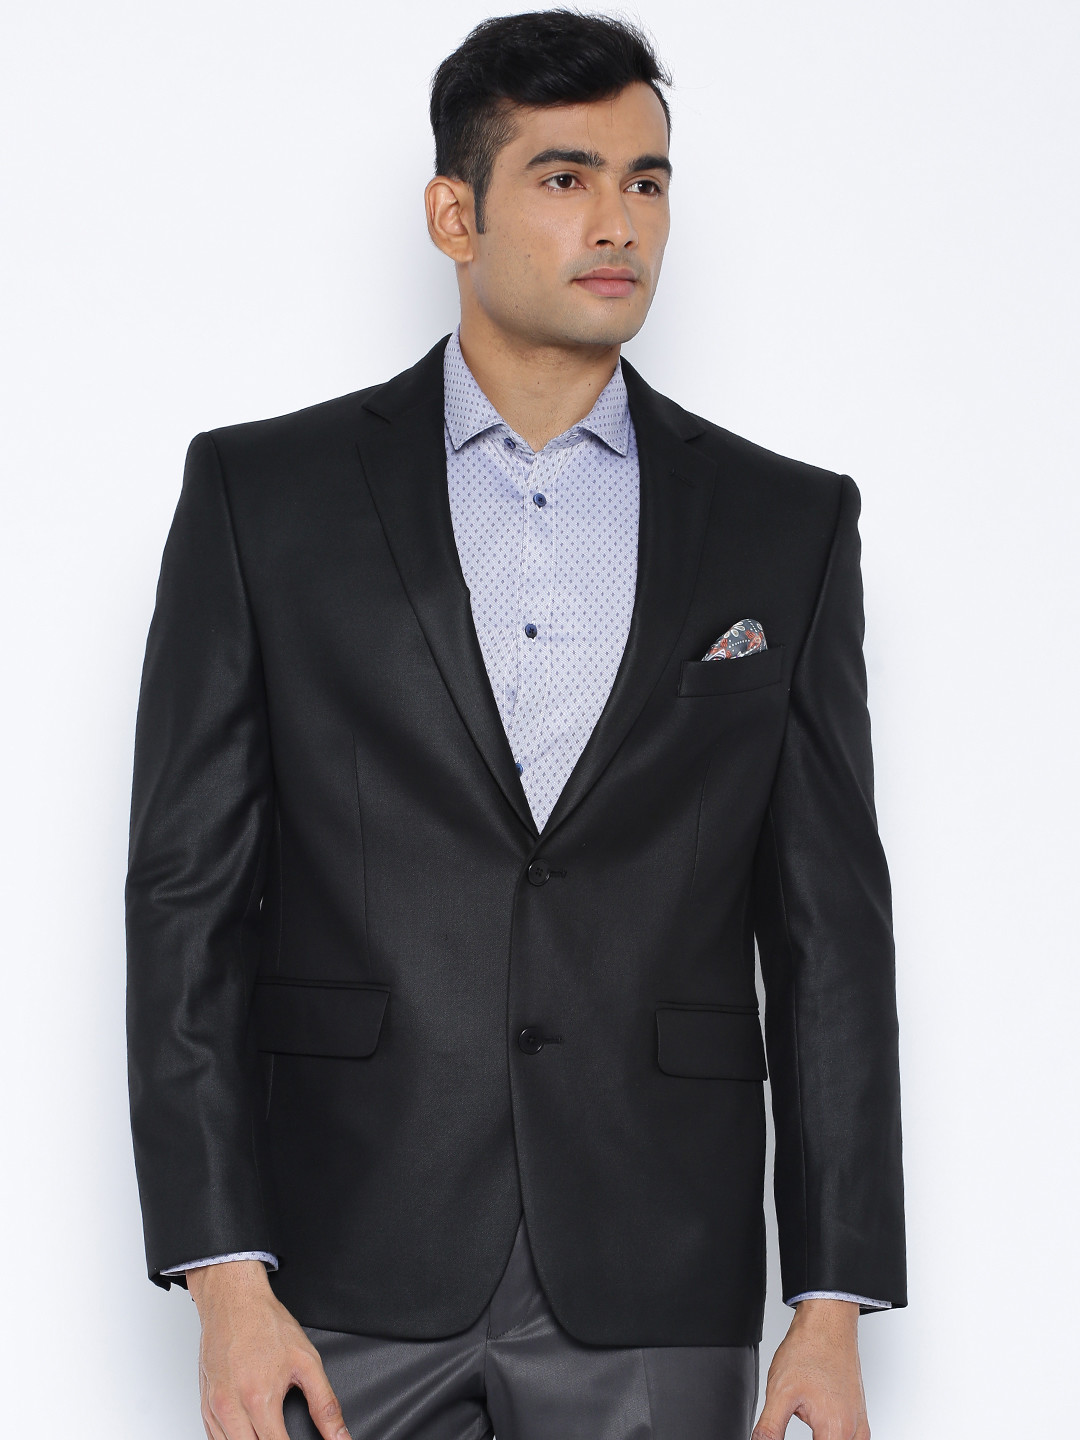 (Hurry) Myntra - Flat 80% Off On SUITLTD Suits